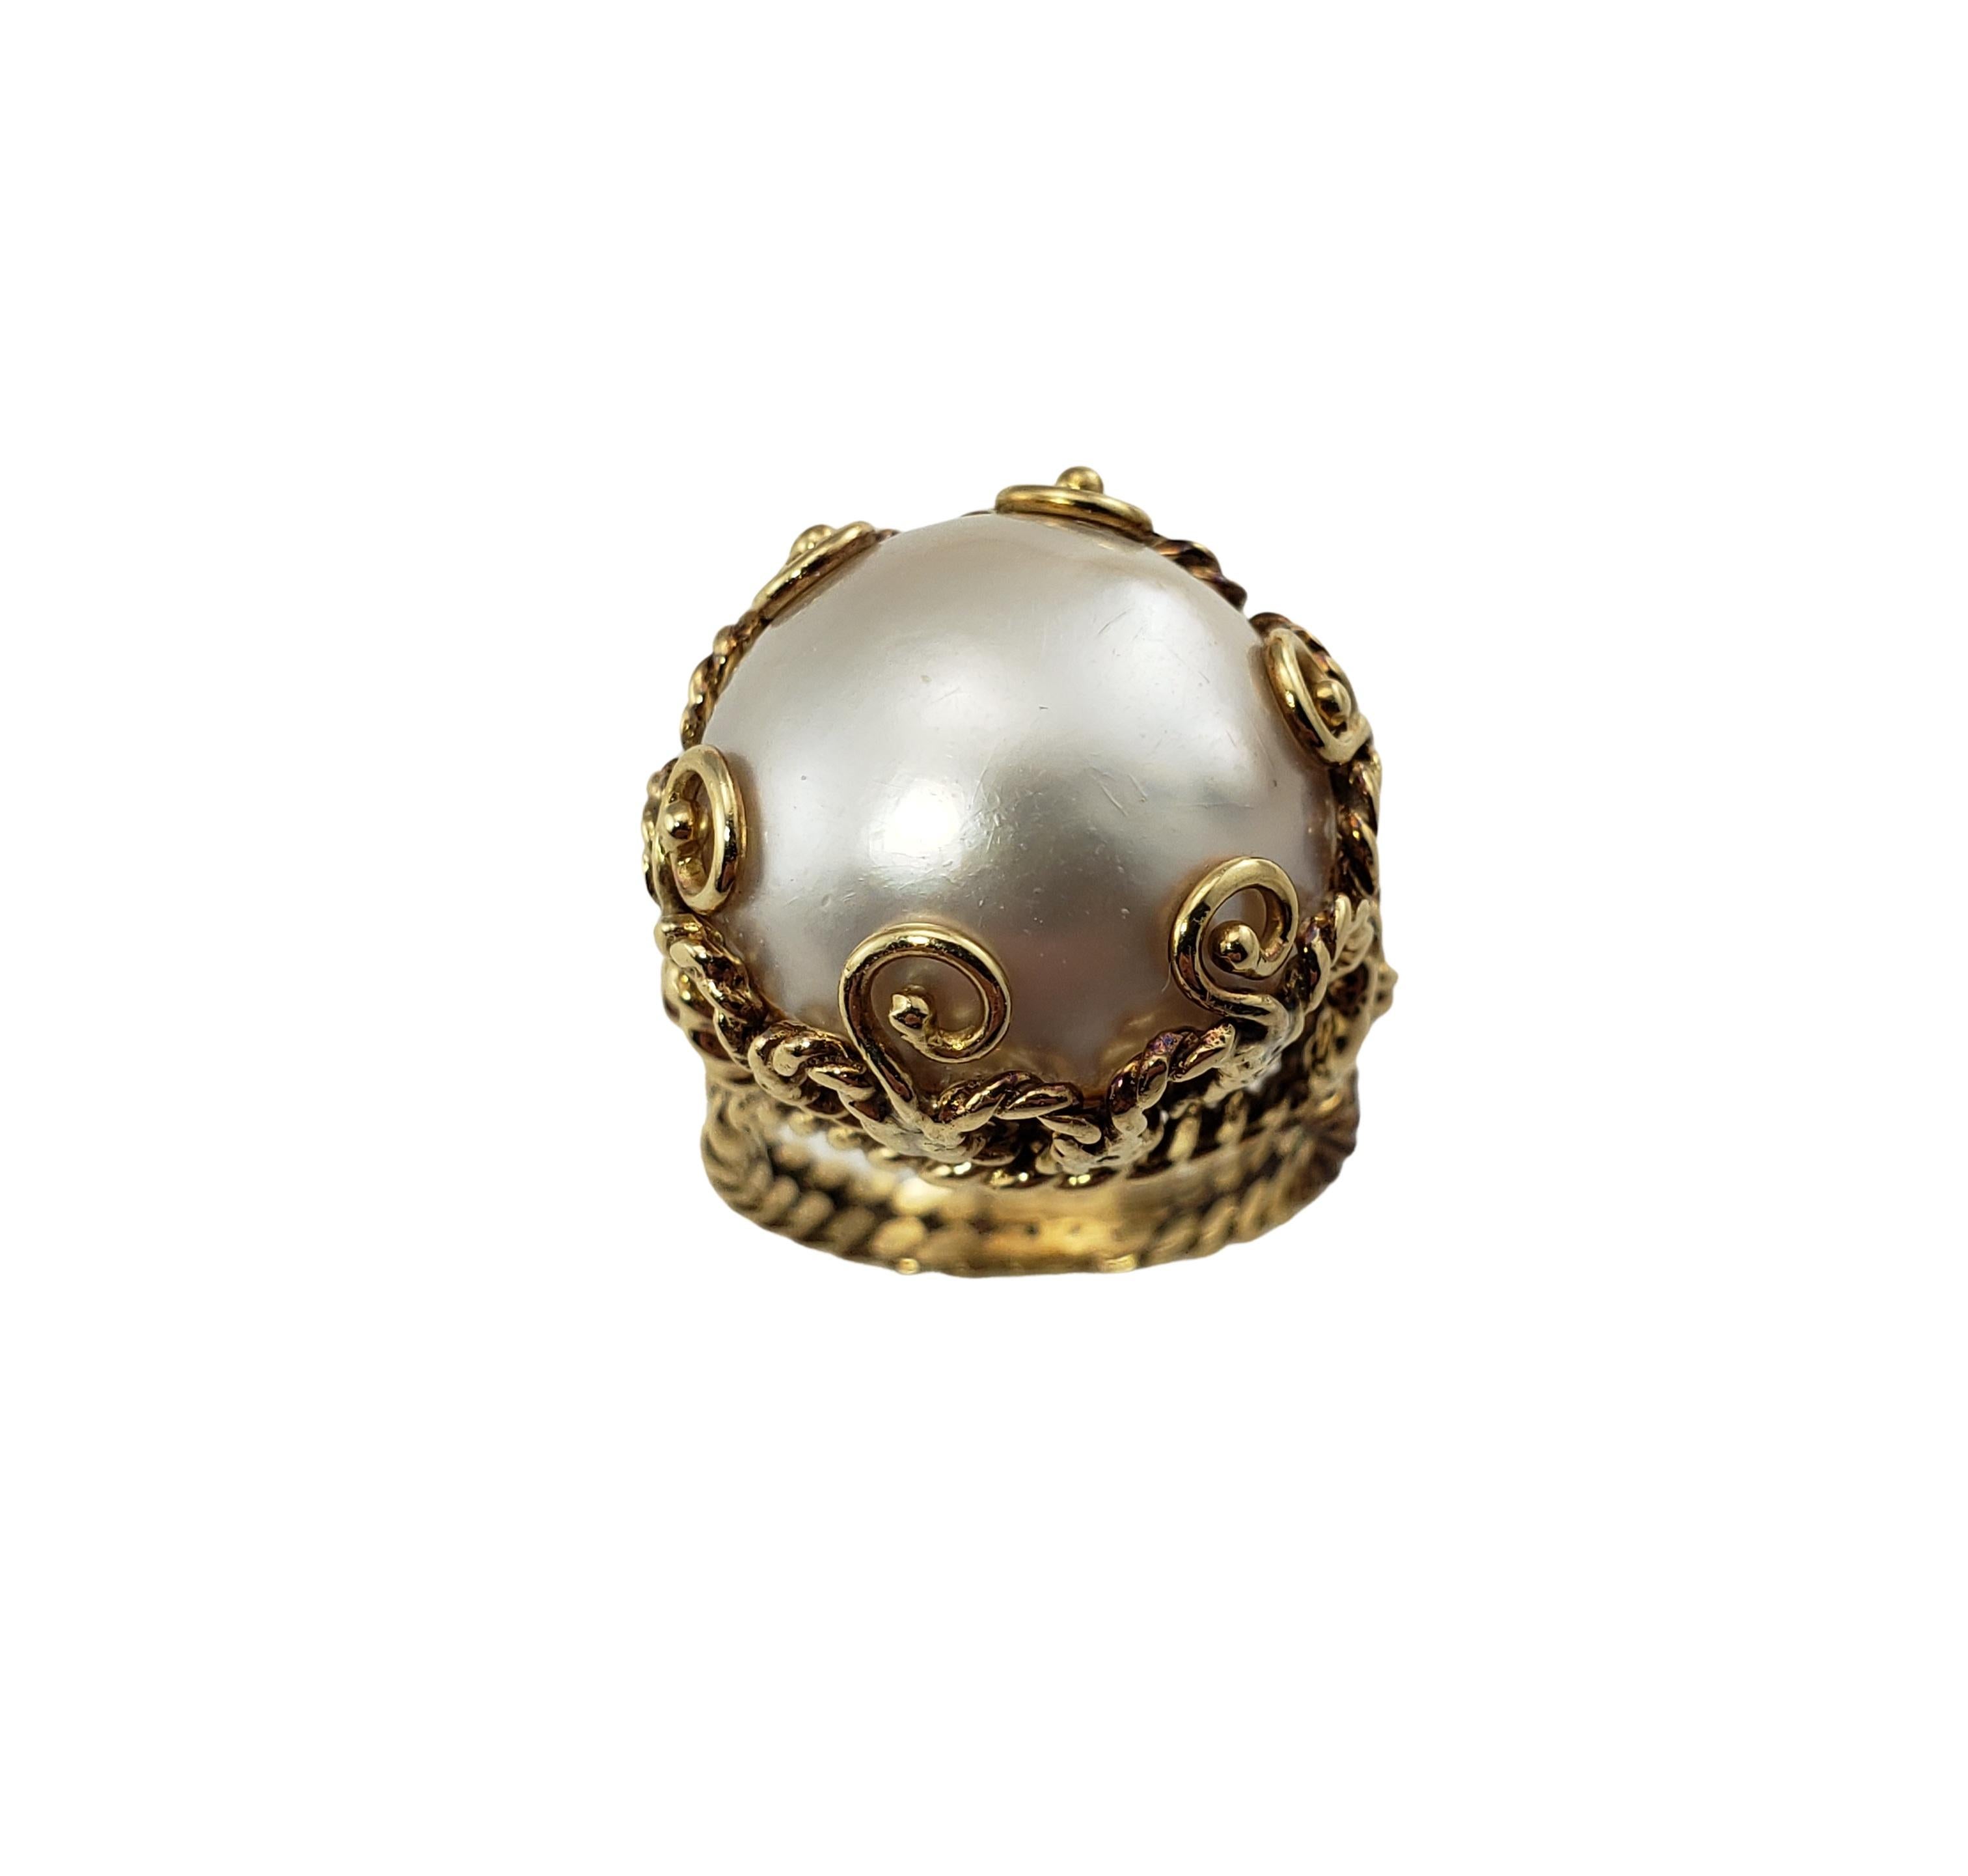 14 Karat Yellow Gold Mobe Pearl Ring Size 6.25-

This lovely ring features one Mobe pearl (17 mm) set in beautifully detailed 14K yellow gold.  Shank:  3 mm.  Height:  15 mm.

Ring Size: 6.25

Weight:  7.9 dwt. /  12.3 gr.

Tested for 14K